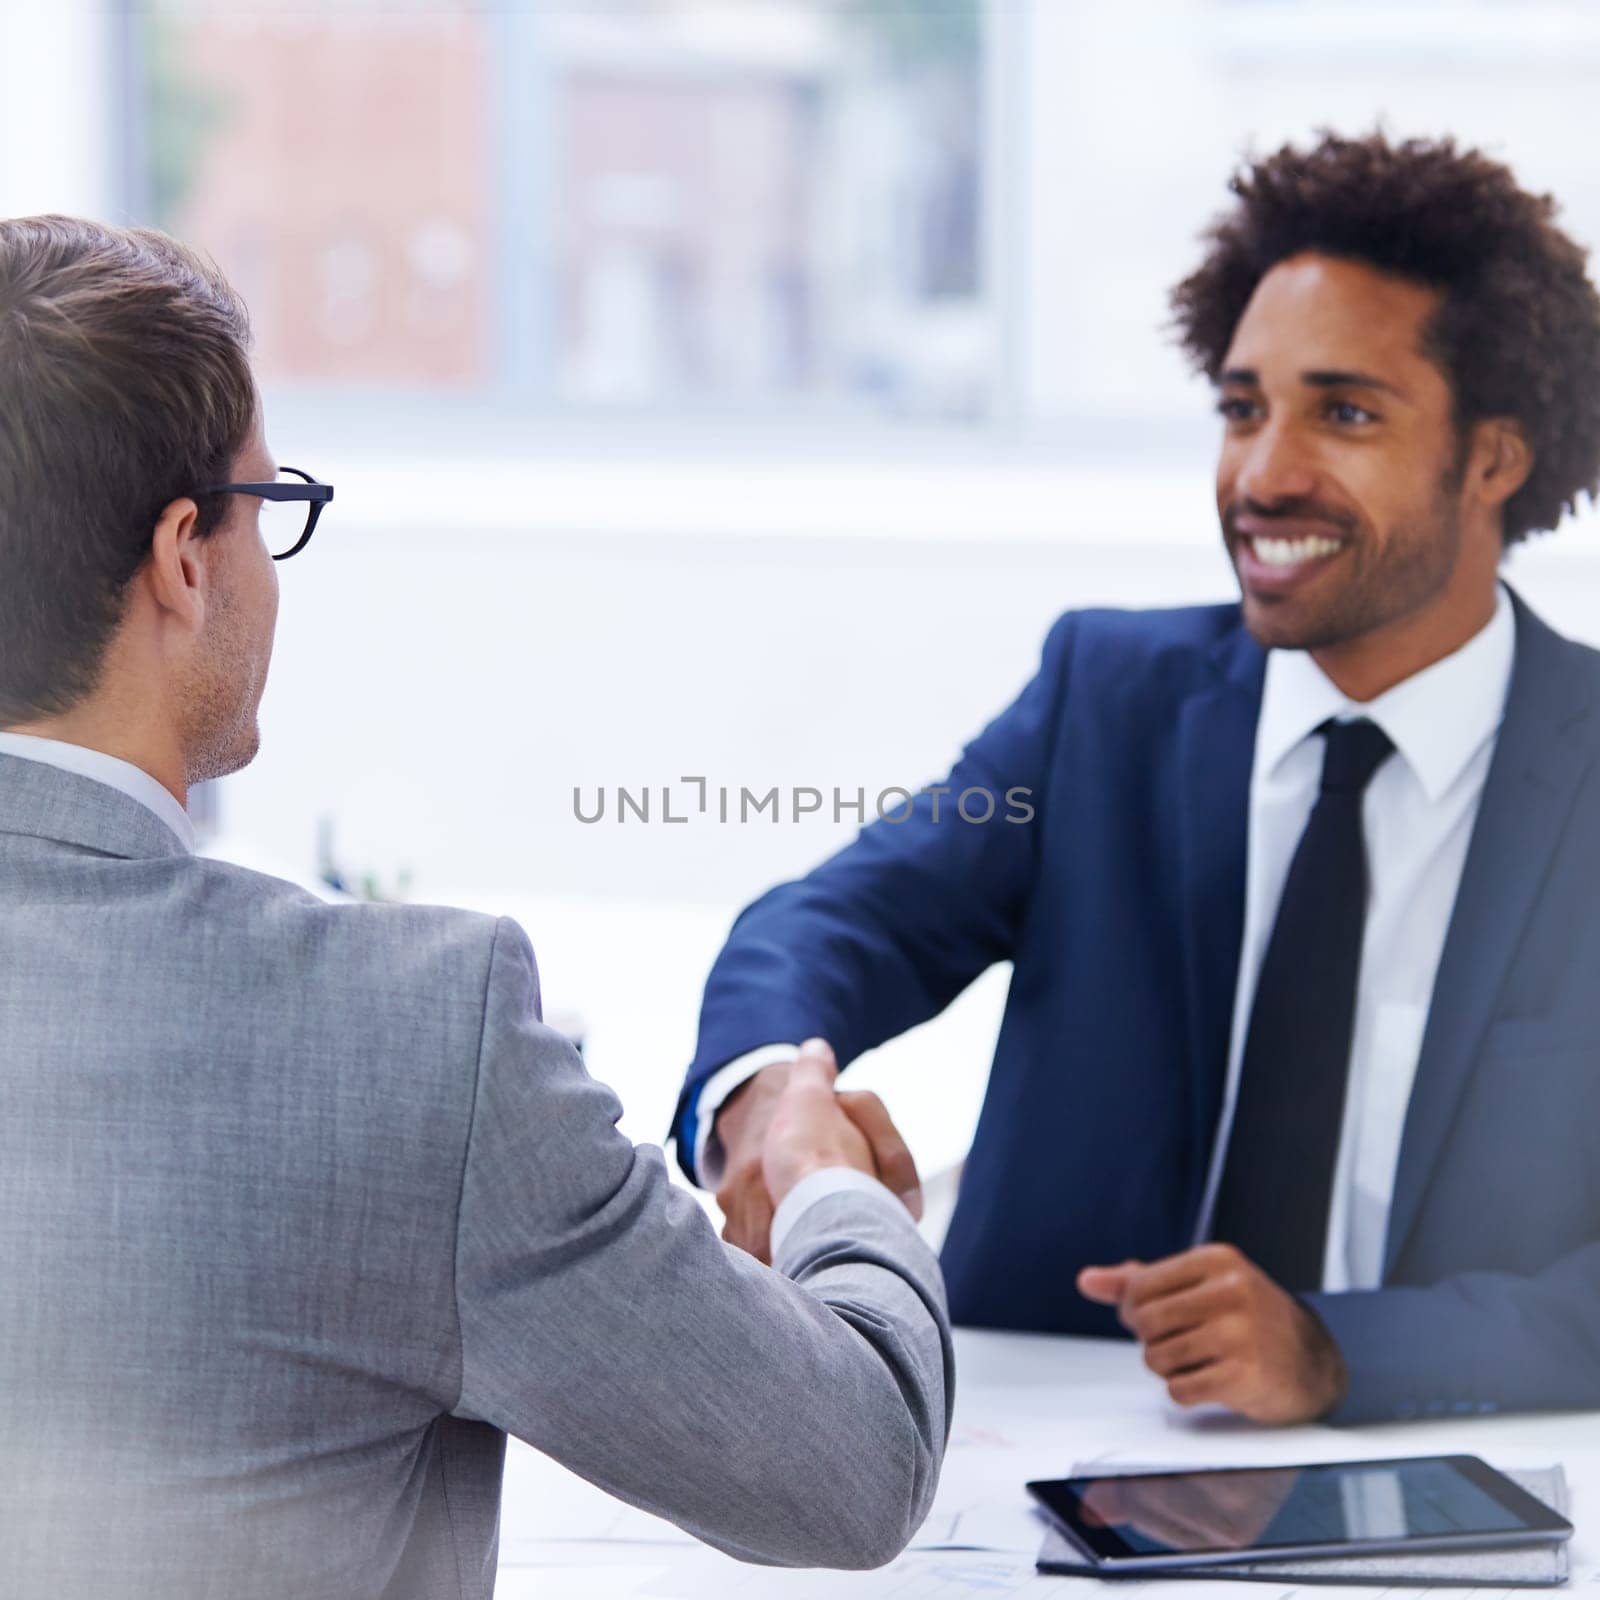 Feeling good about the meeting. Shot of businessmen shaking hands in an office